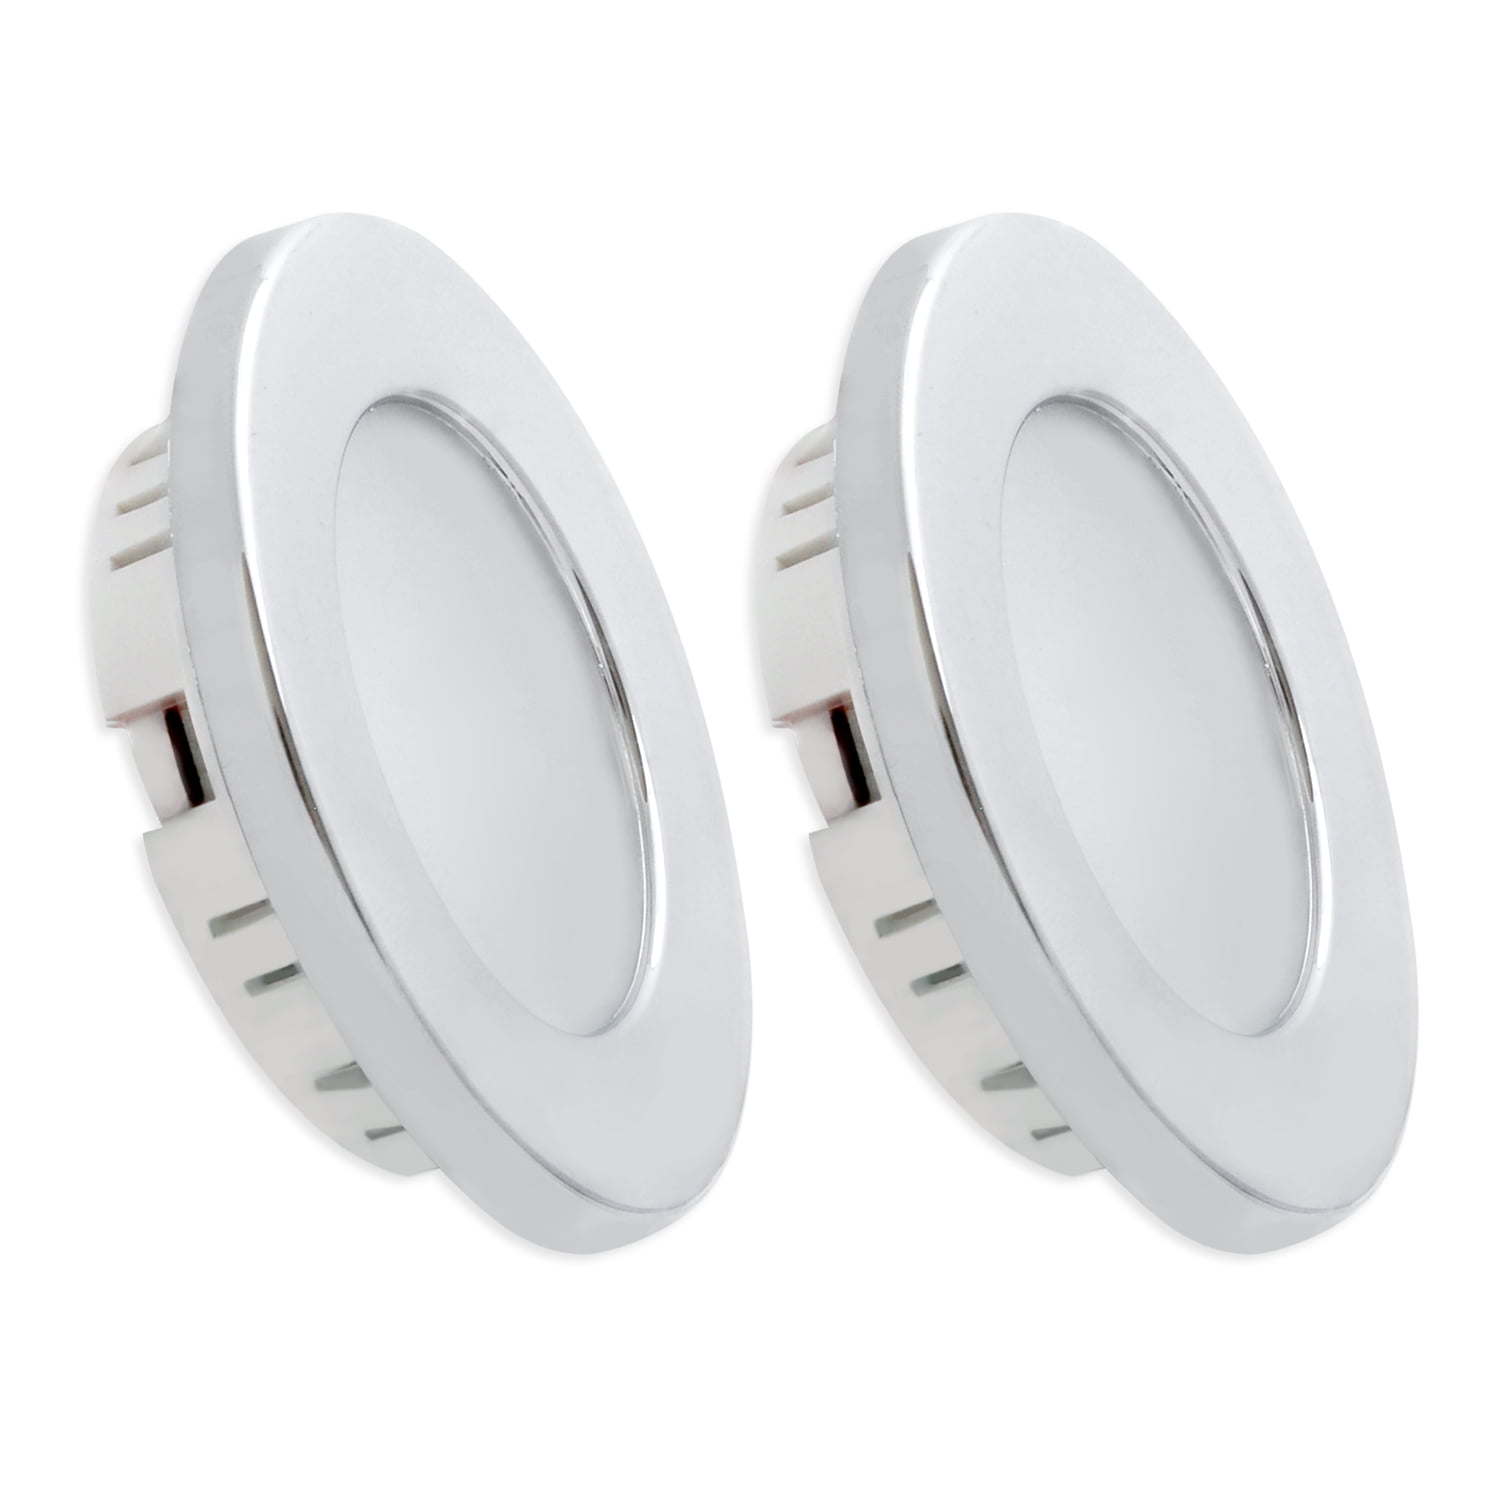 *4" ROUND 18 LED FLUSH MOUNT 12 VOLT LIGHT WHITE WITH ON/OFF SWITCH IN CENTER 